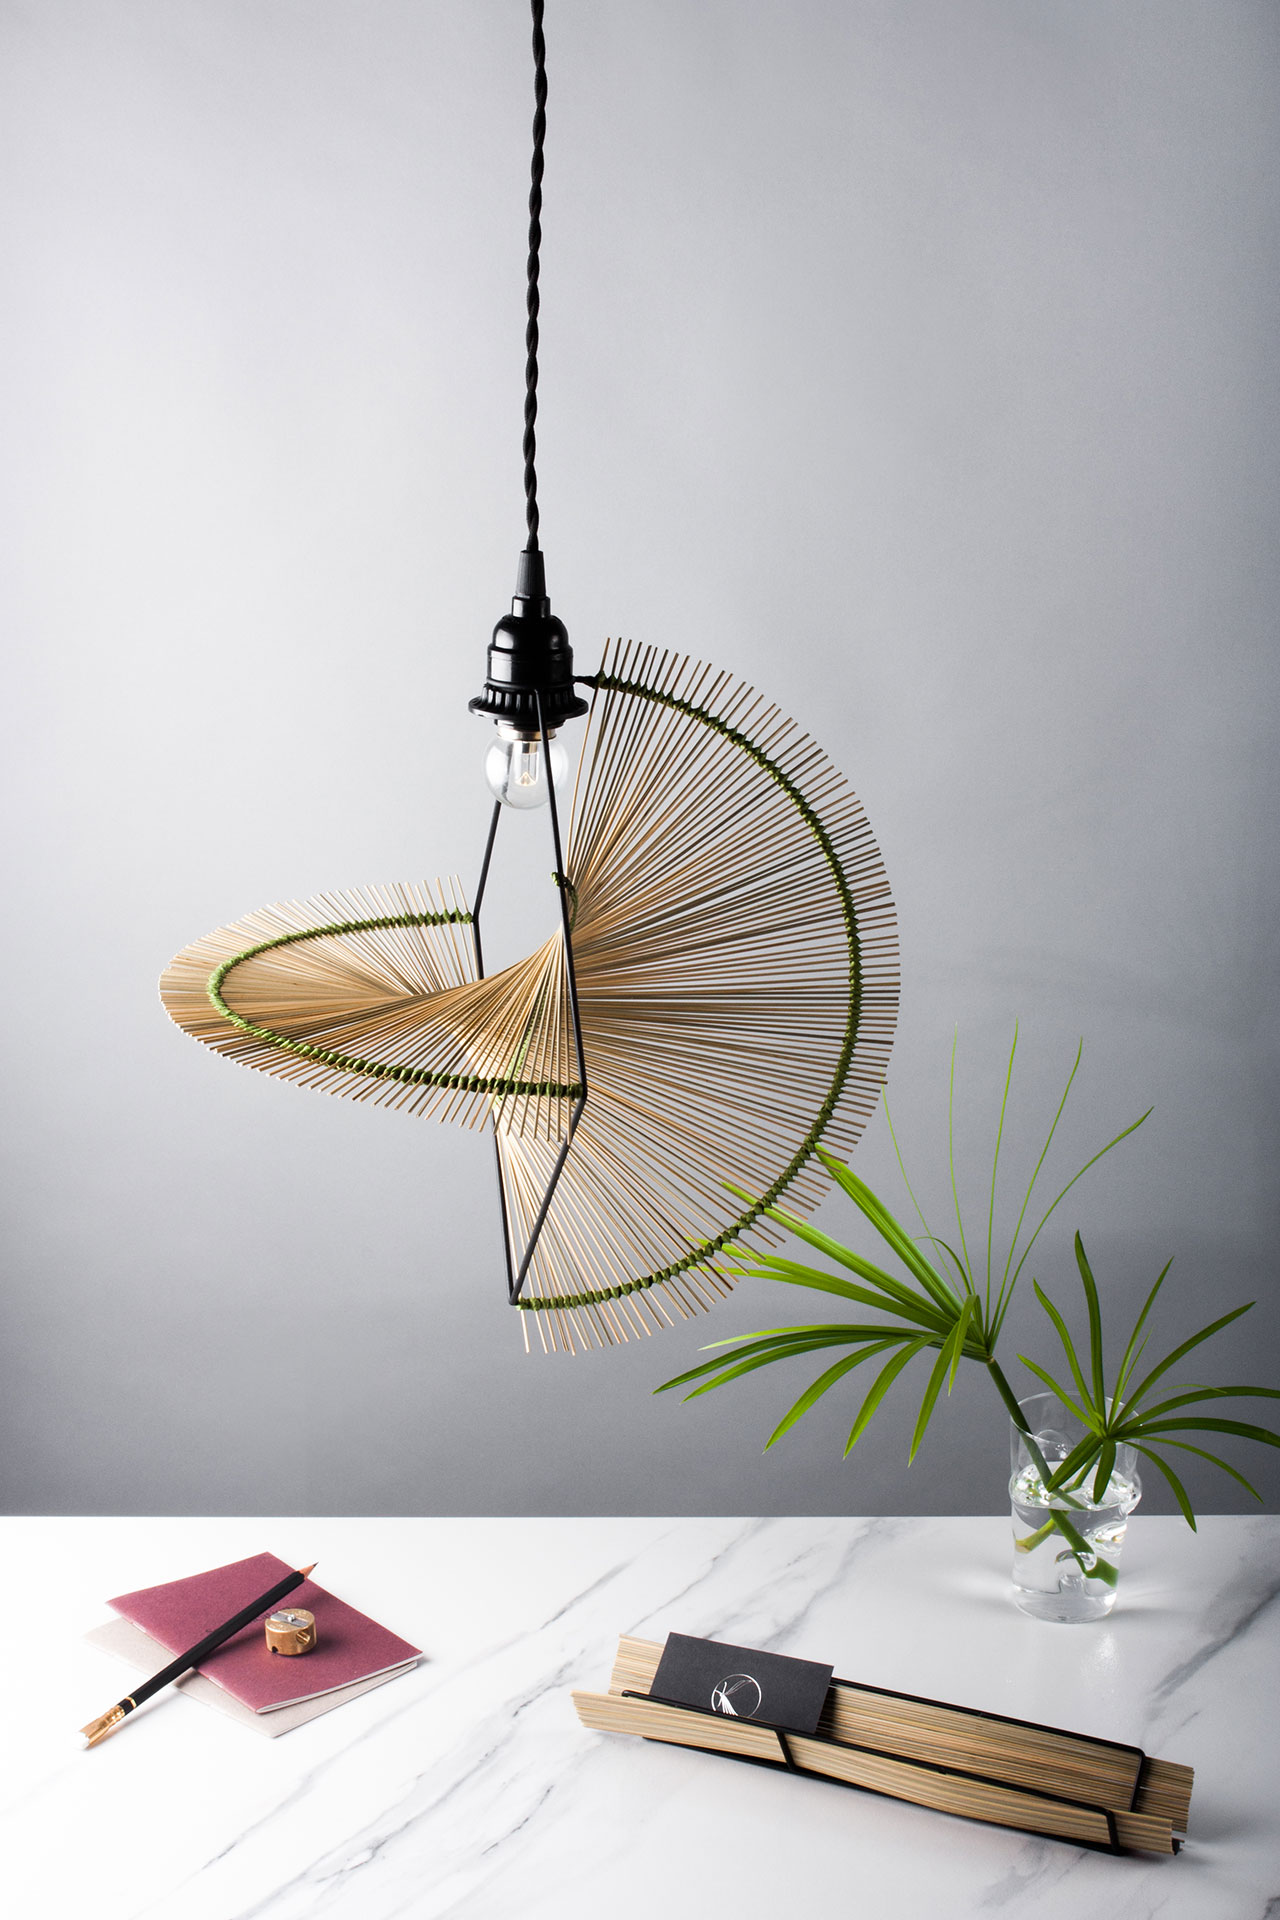 Pendant light from the 2016 "Riyar" collection by Kamaro'an. 
Design by Yun Fann and Shane Liu. 
Photo by Jy Yuan. 